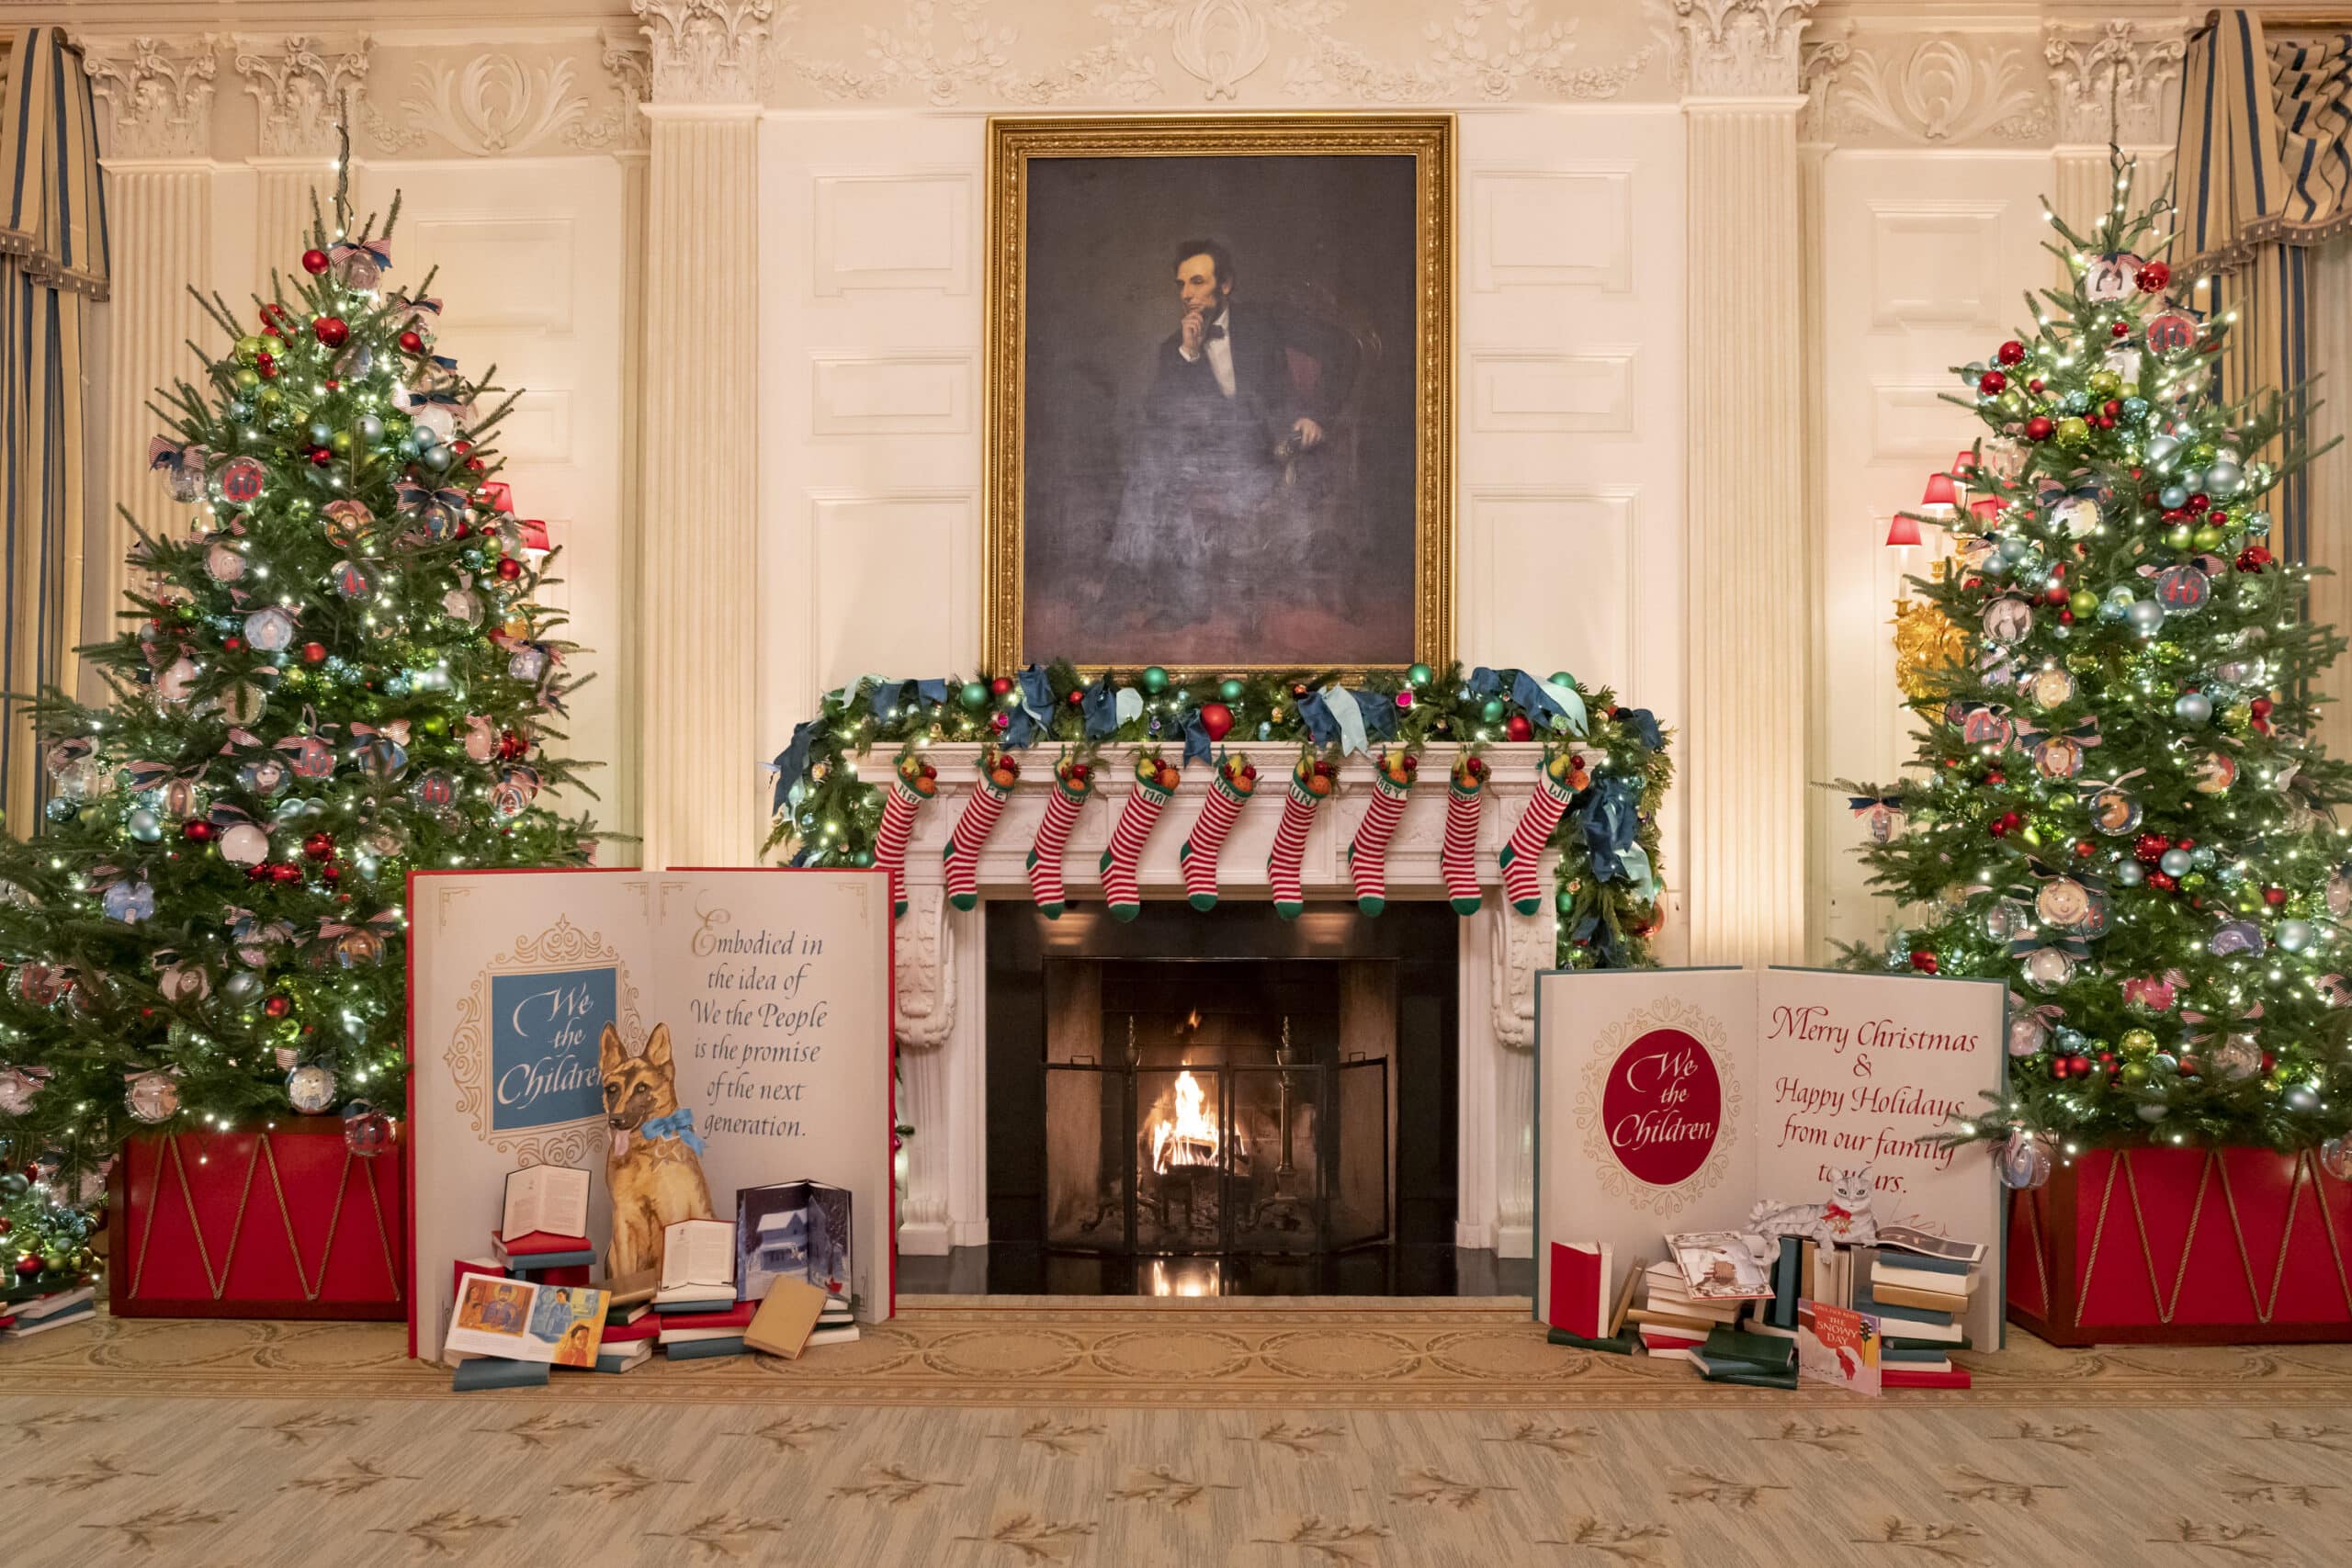 White House State Dining Room holiday decorations 2022